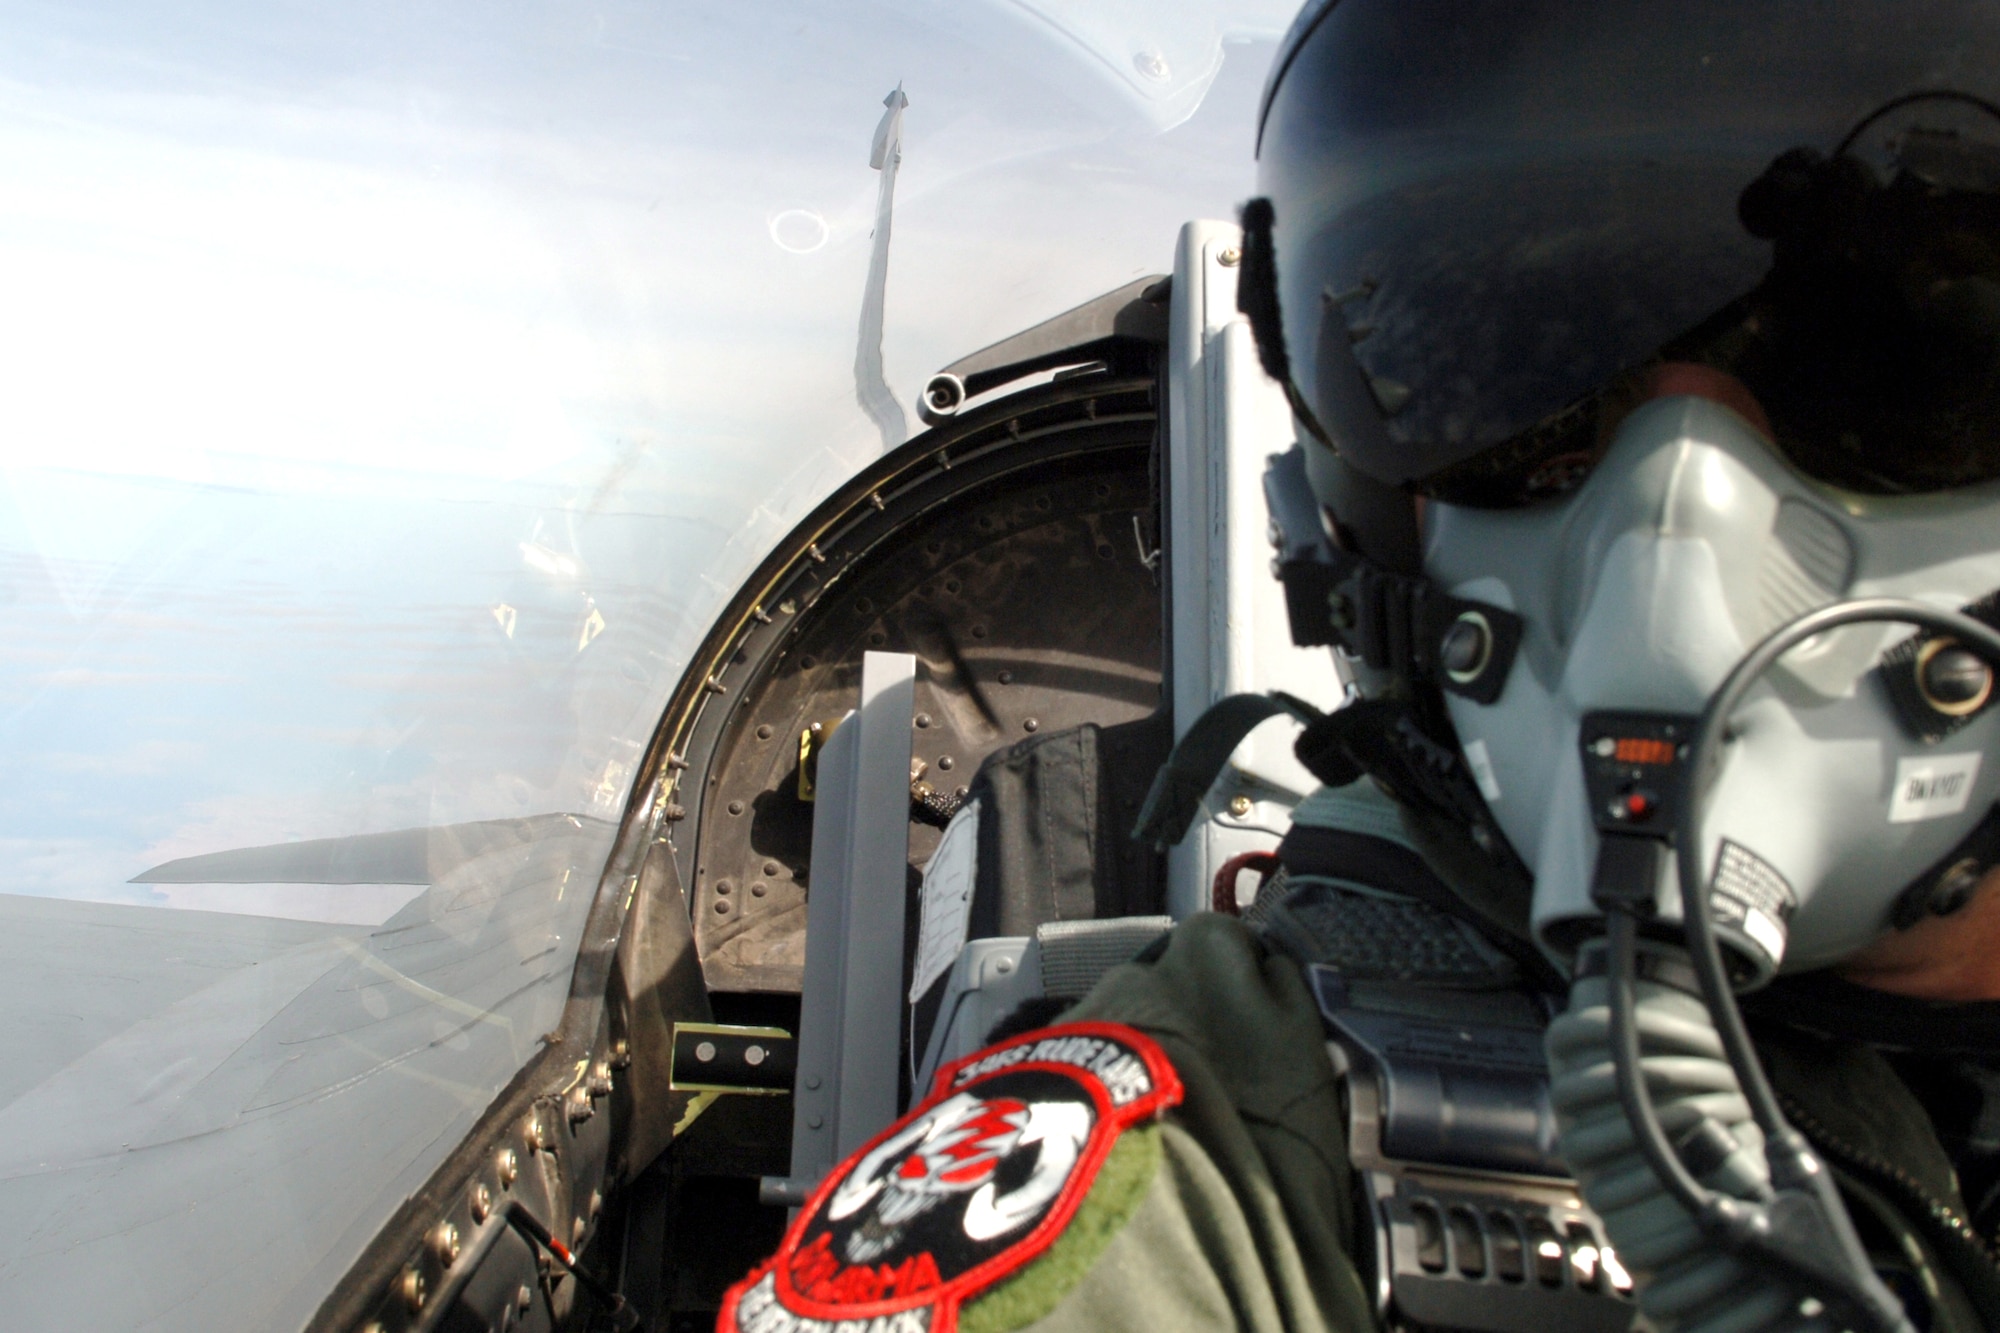 An F-16 Fighting Falcon piloted by Lt. Col. Tom "Divot" Smith flies over Peru during dissimilar air combat training as part of Falcon and Condor 2007, a joint exercise between the U.S. and Peruvian Air Forces. The exercise allows the U.S. military to build relationships with military and civilian leaders of Peru. The F-16 is from the 34th Fighter Squadron at Hill Air Force Base, Utah. (U.S. Air Force photo/Tech. Sgt. Eric Kreps)